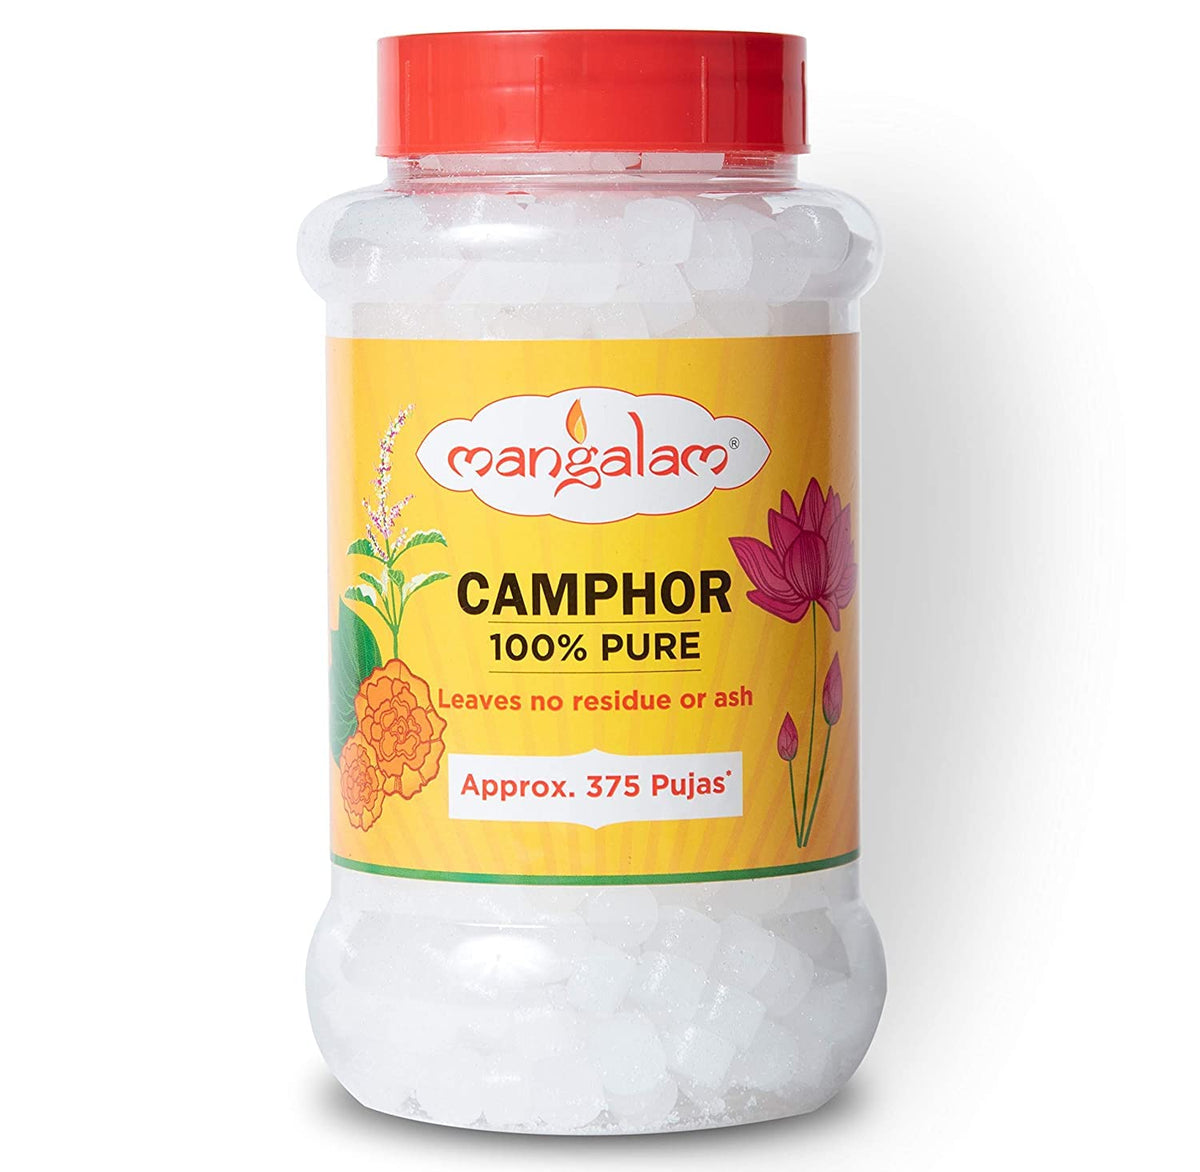 Mangalam 100% Pure Camphor Slab Leaves No Residue Or Ash Bottle Tablet